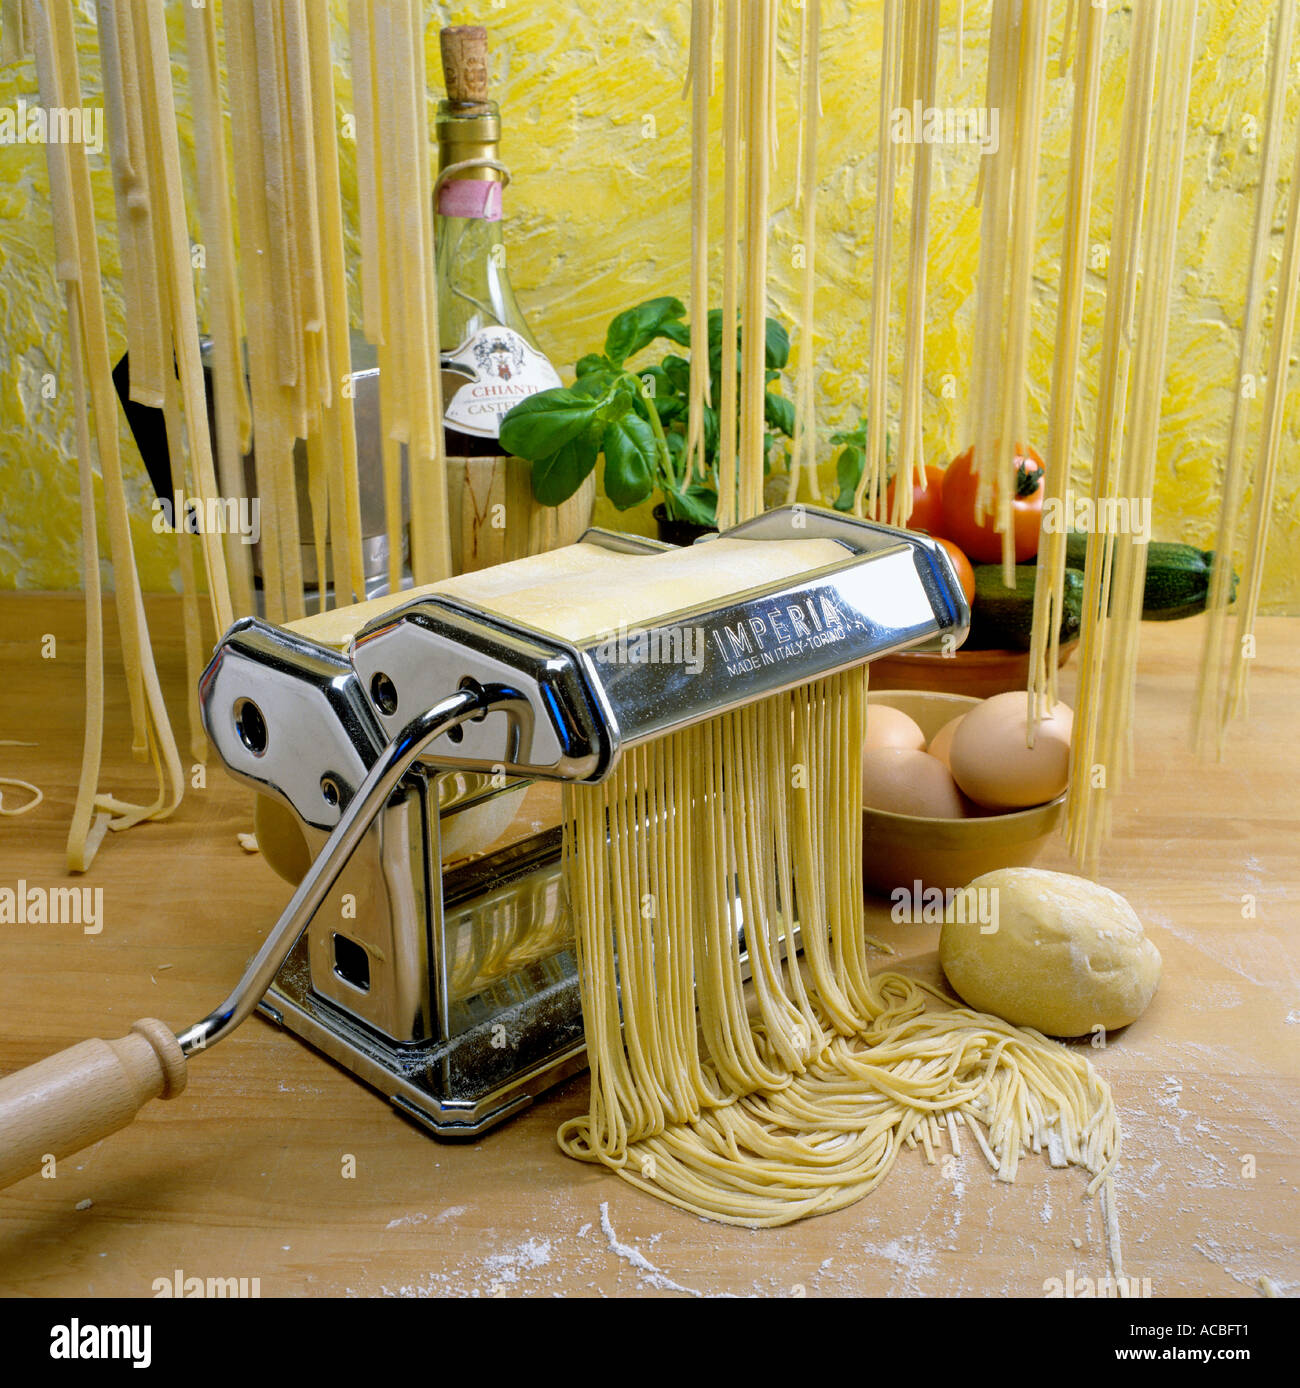 pasta machine editorial use only Stock Photo